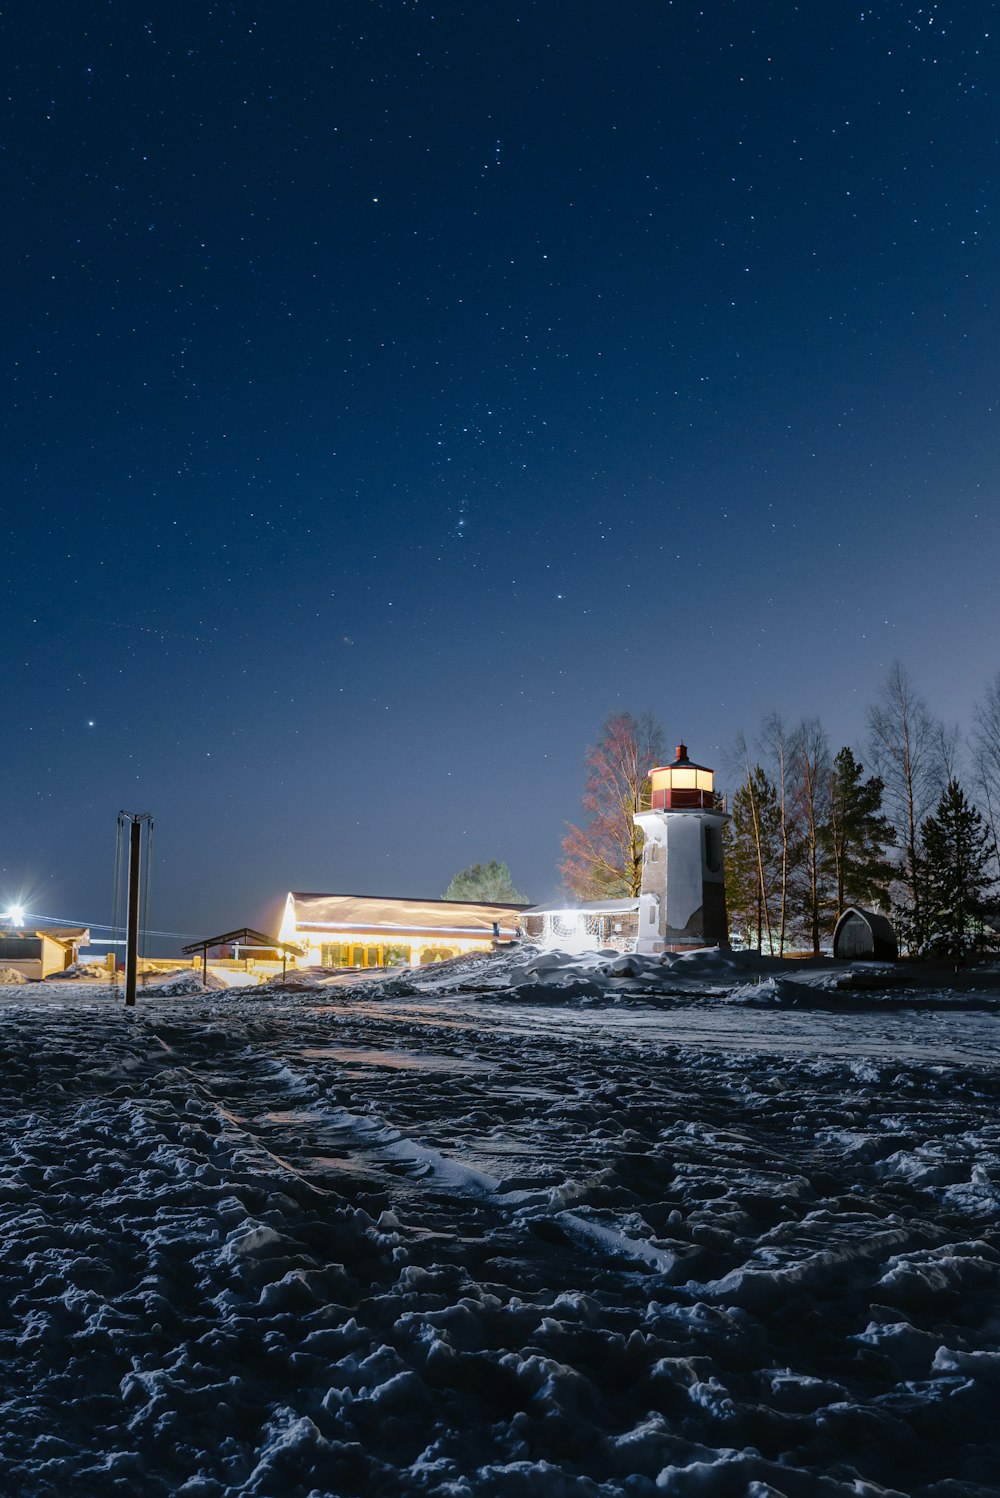 a lighthouse in the middle of a snowy field